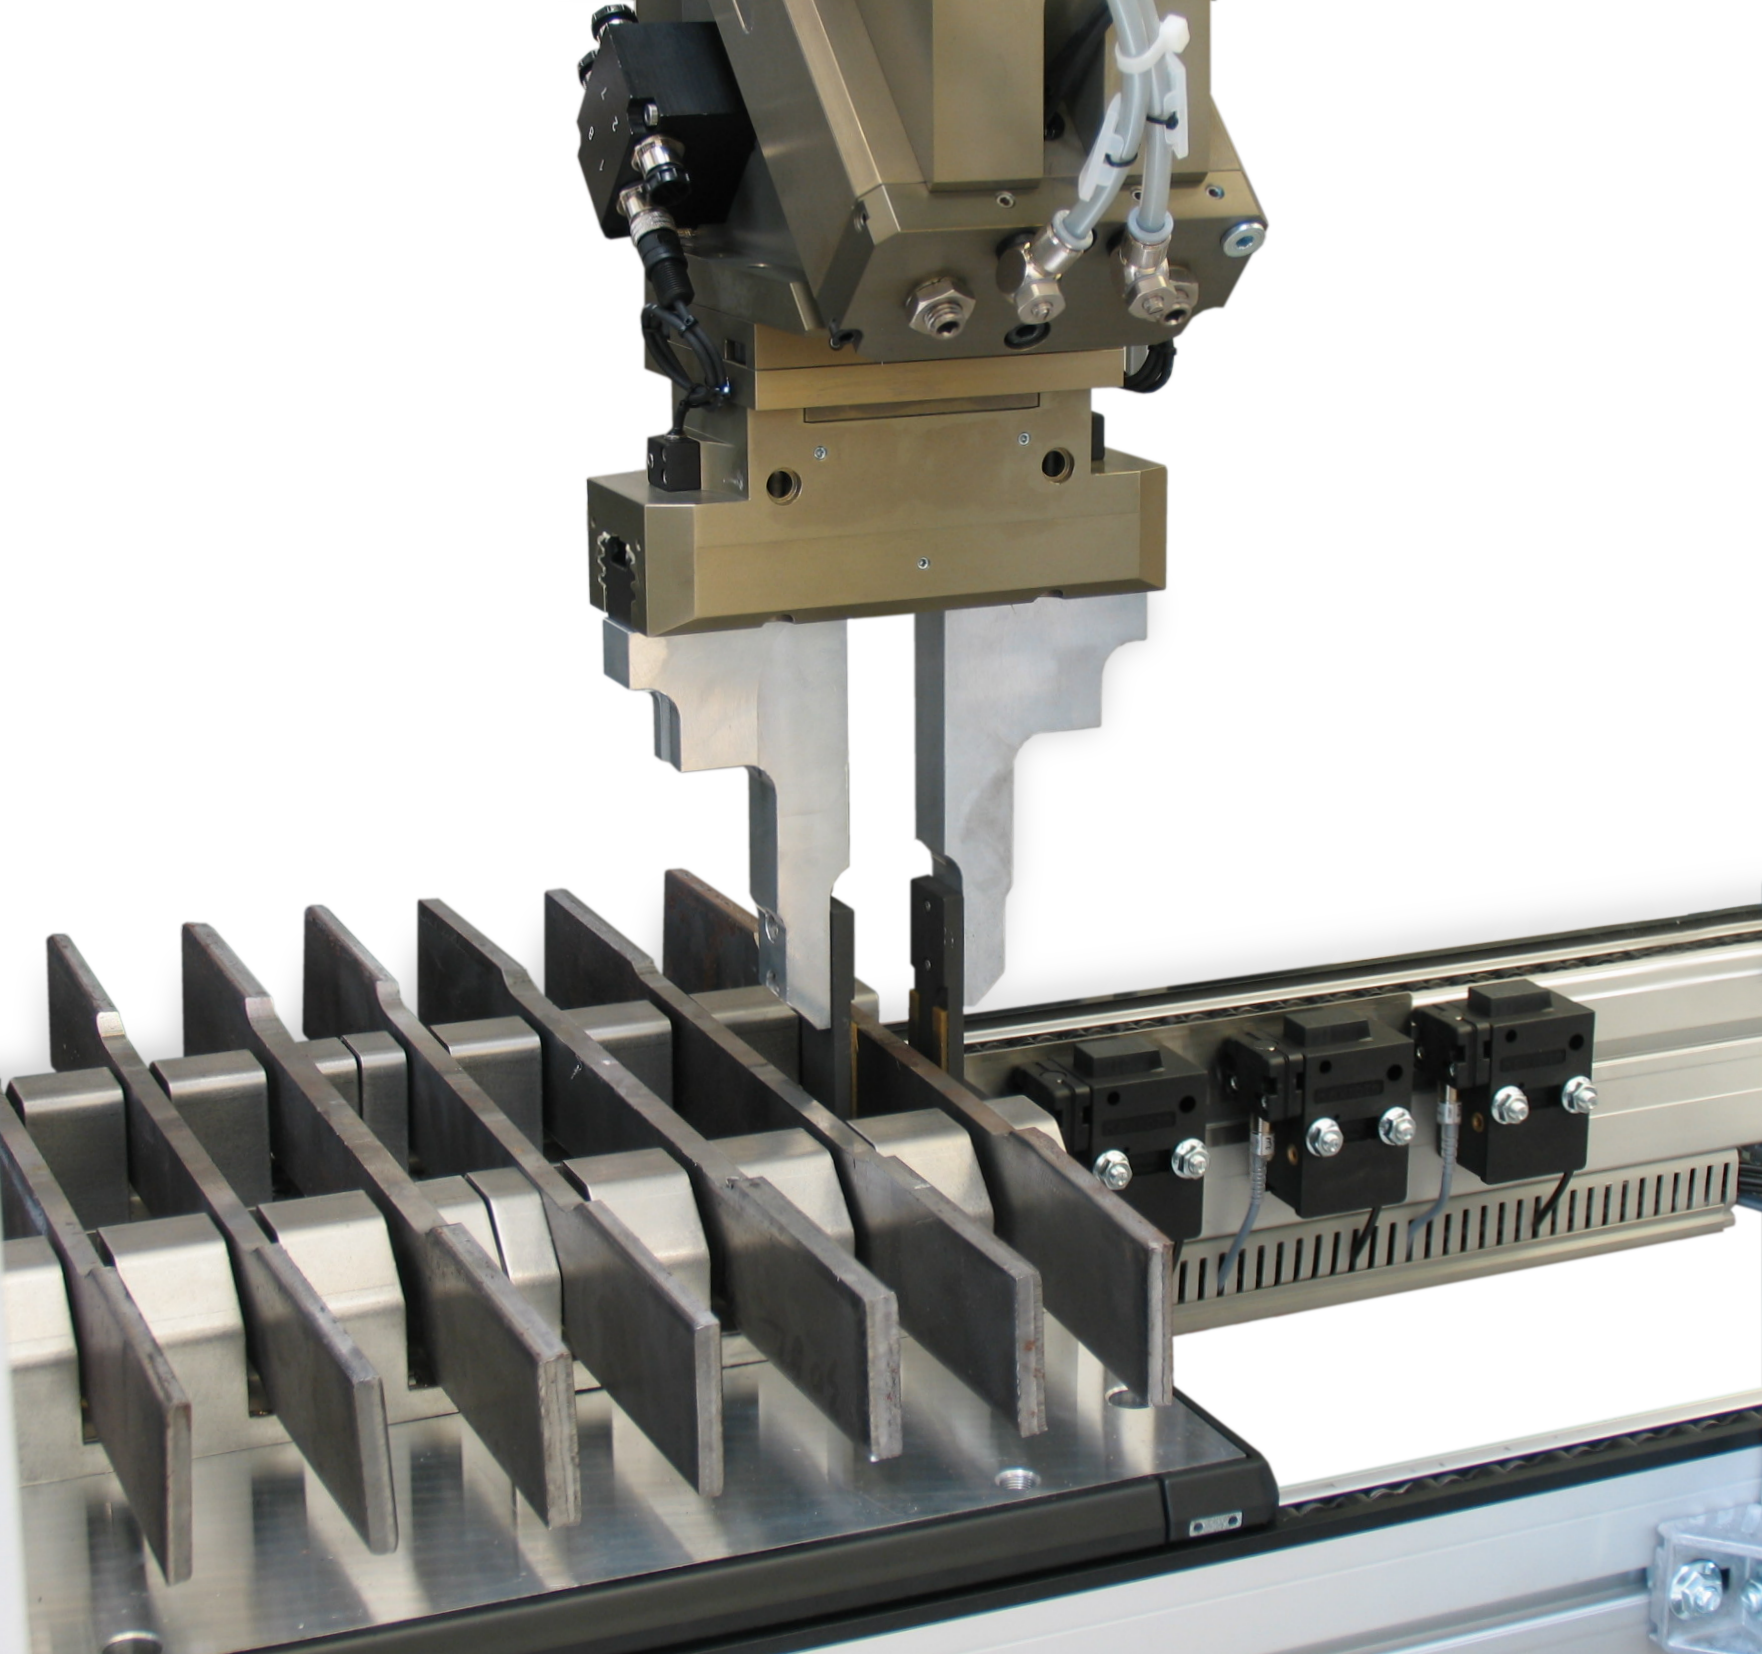 roboTest C gripper used to remove specimens